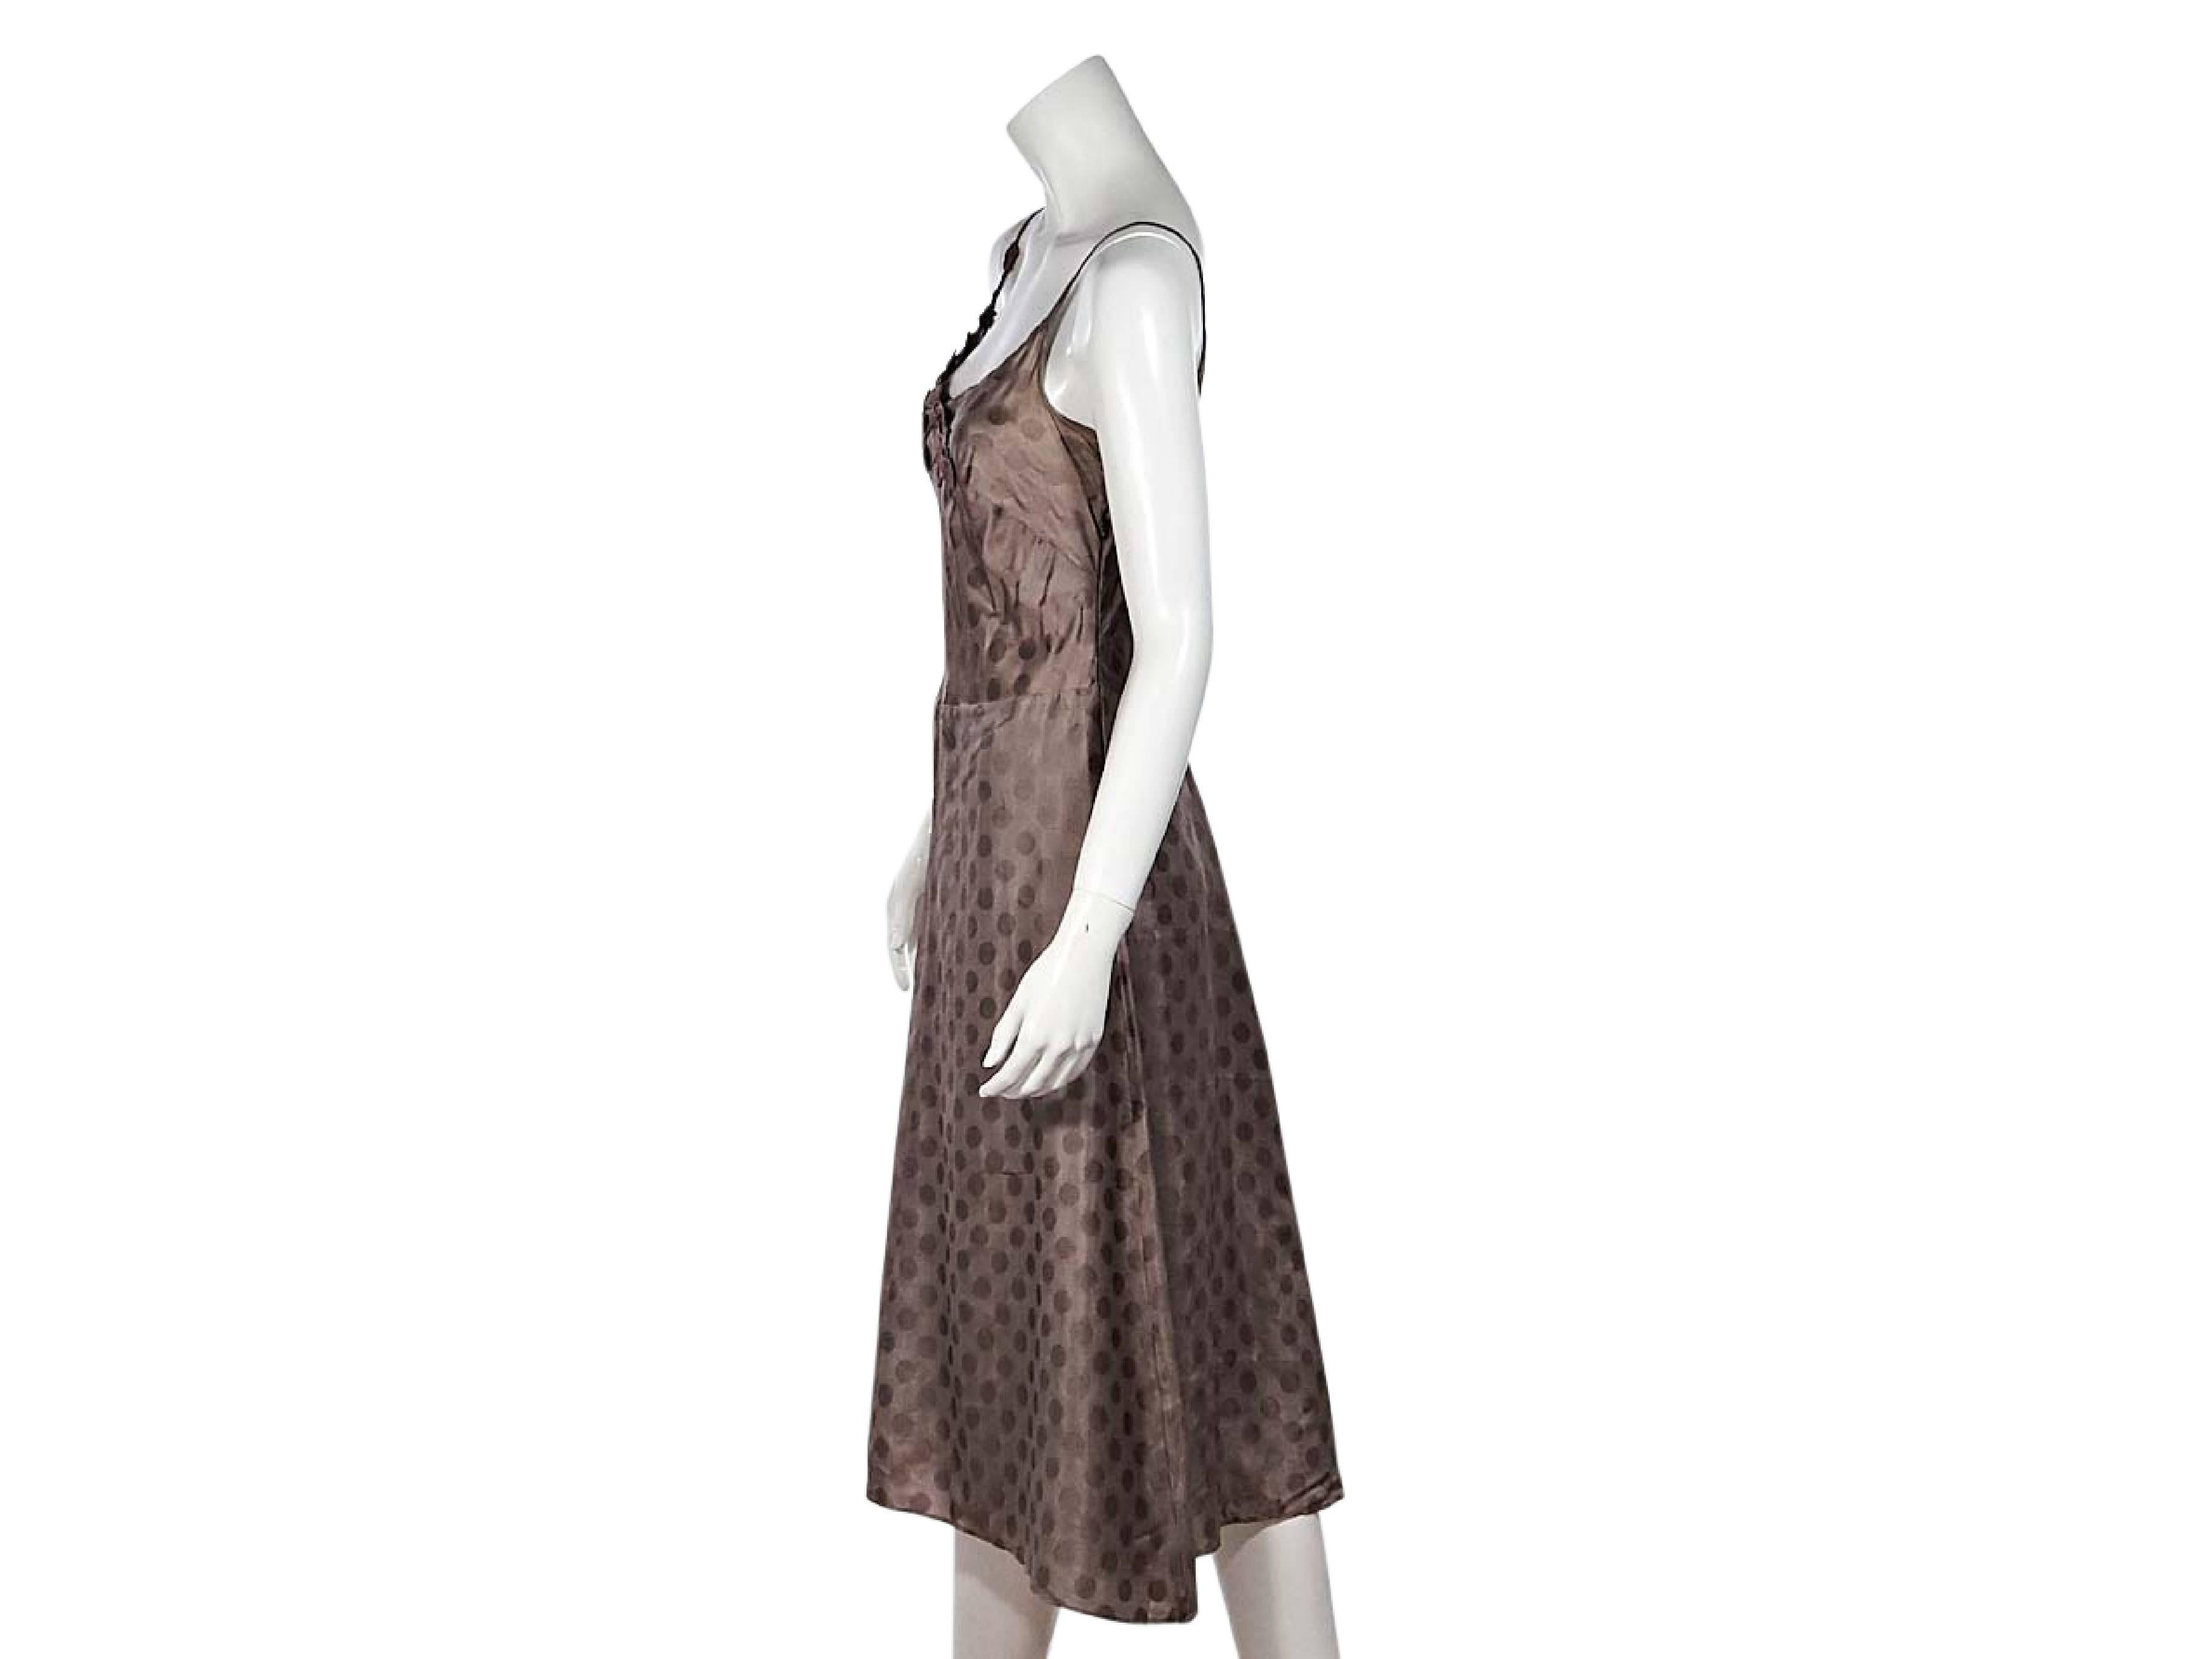 Product details:  Tan tonal polka dot dress by Isabel Marant.  Accented with floral lace.  Sccopneck.  Sleeveless.  
Condition: Pre-owned. Very good.
Est. Retail $ 775.00